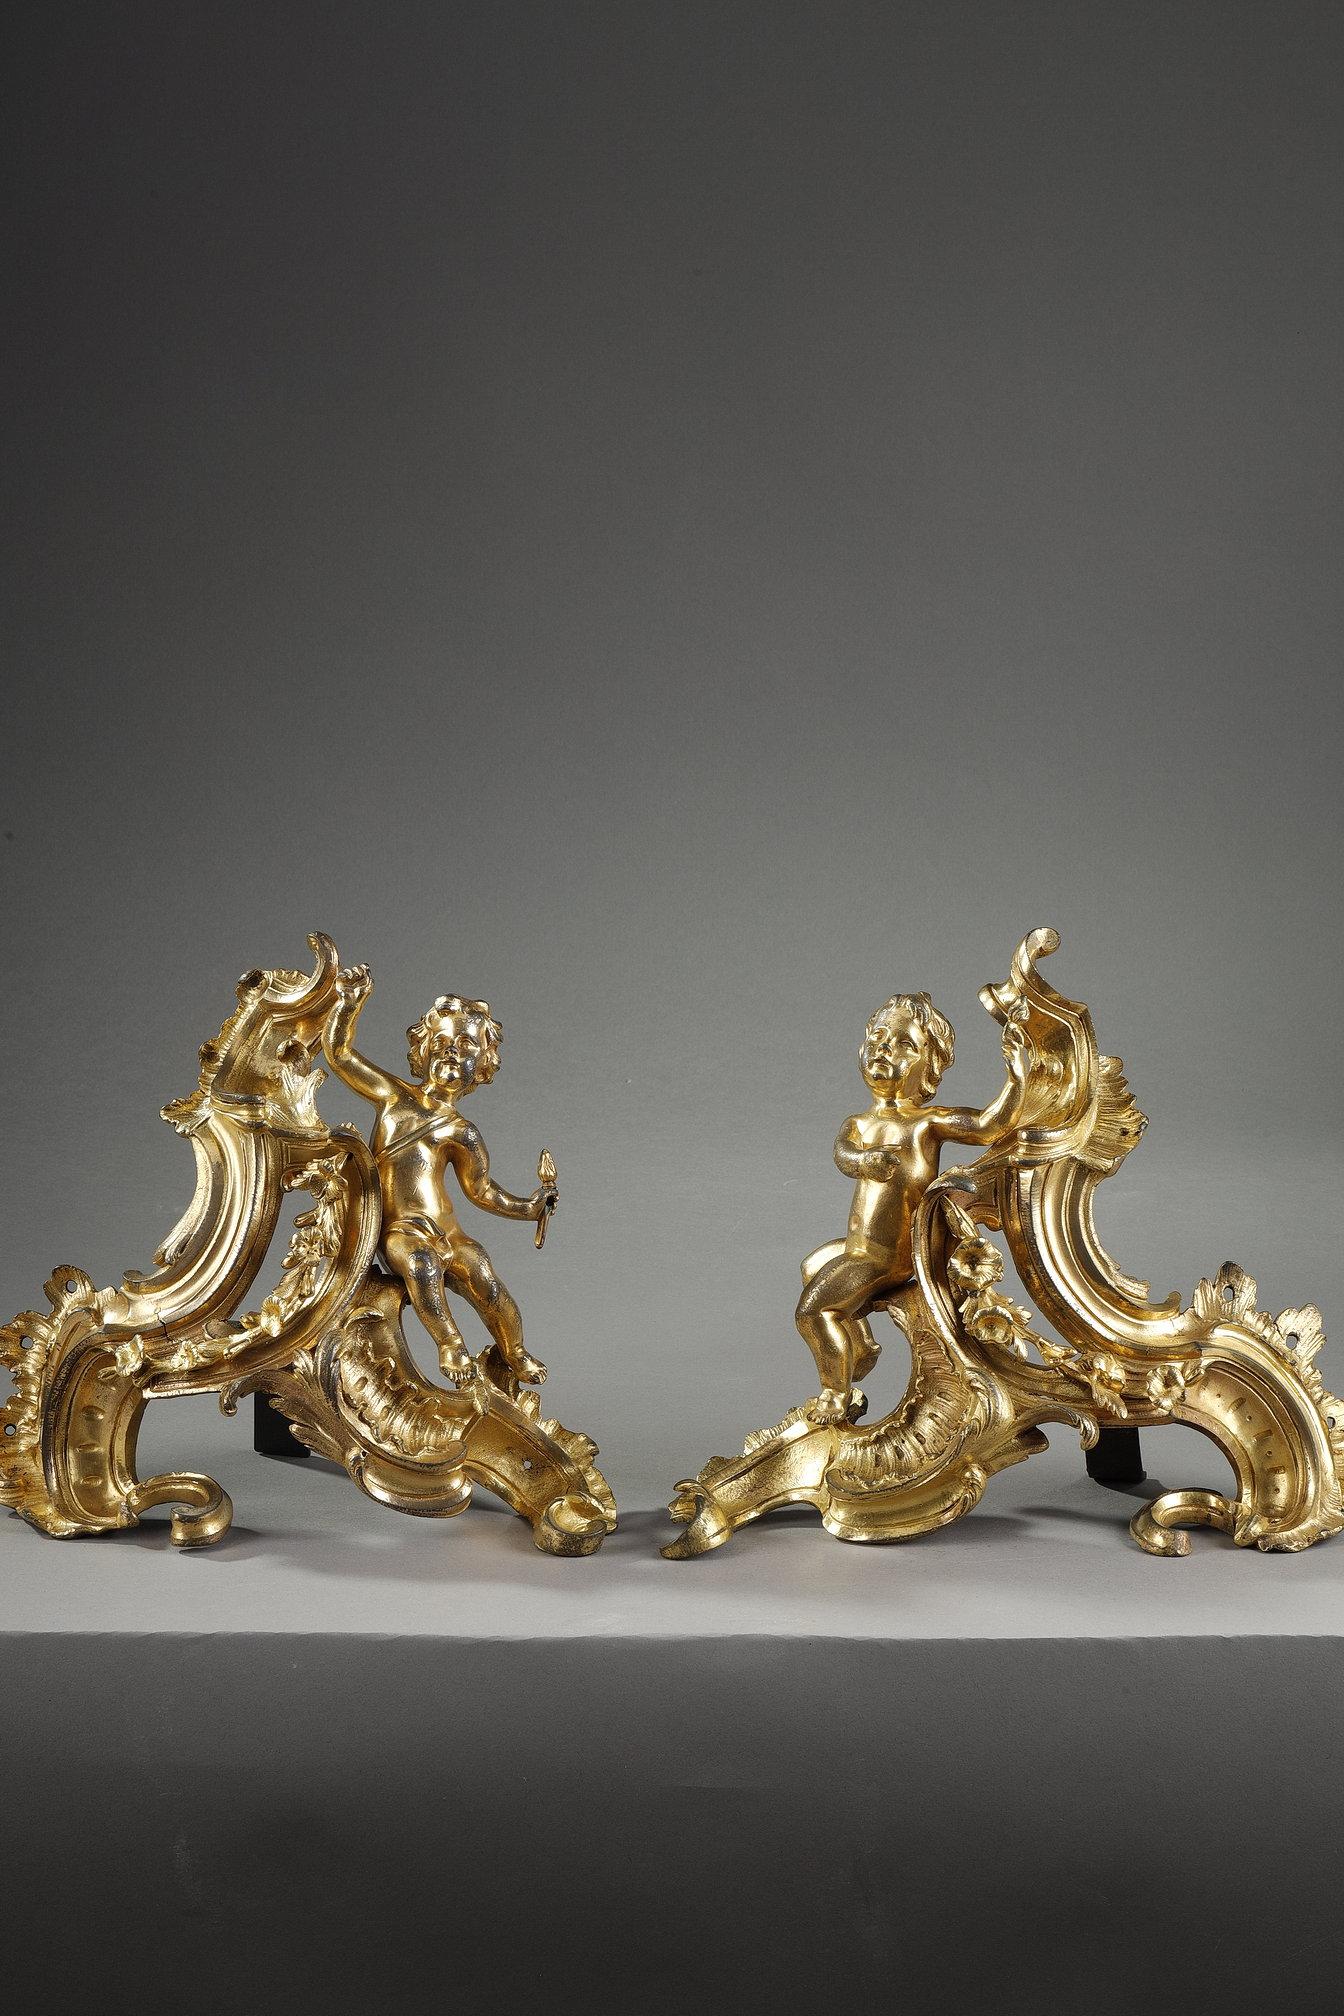 Beautiful pair of Louis XV period mercury ormolu andirons. The two symmetrical pendant putti are seated on leafy scrolls.

Andirons gave the opportunity to bronzemakers under Louis XV to display their utmost imagination, combining different rocaille